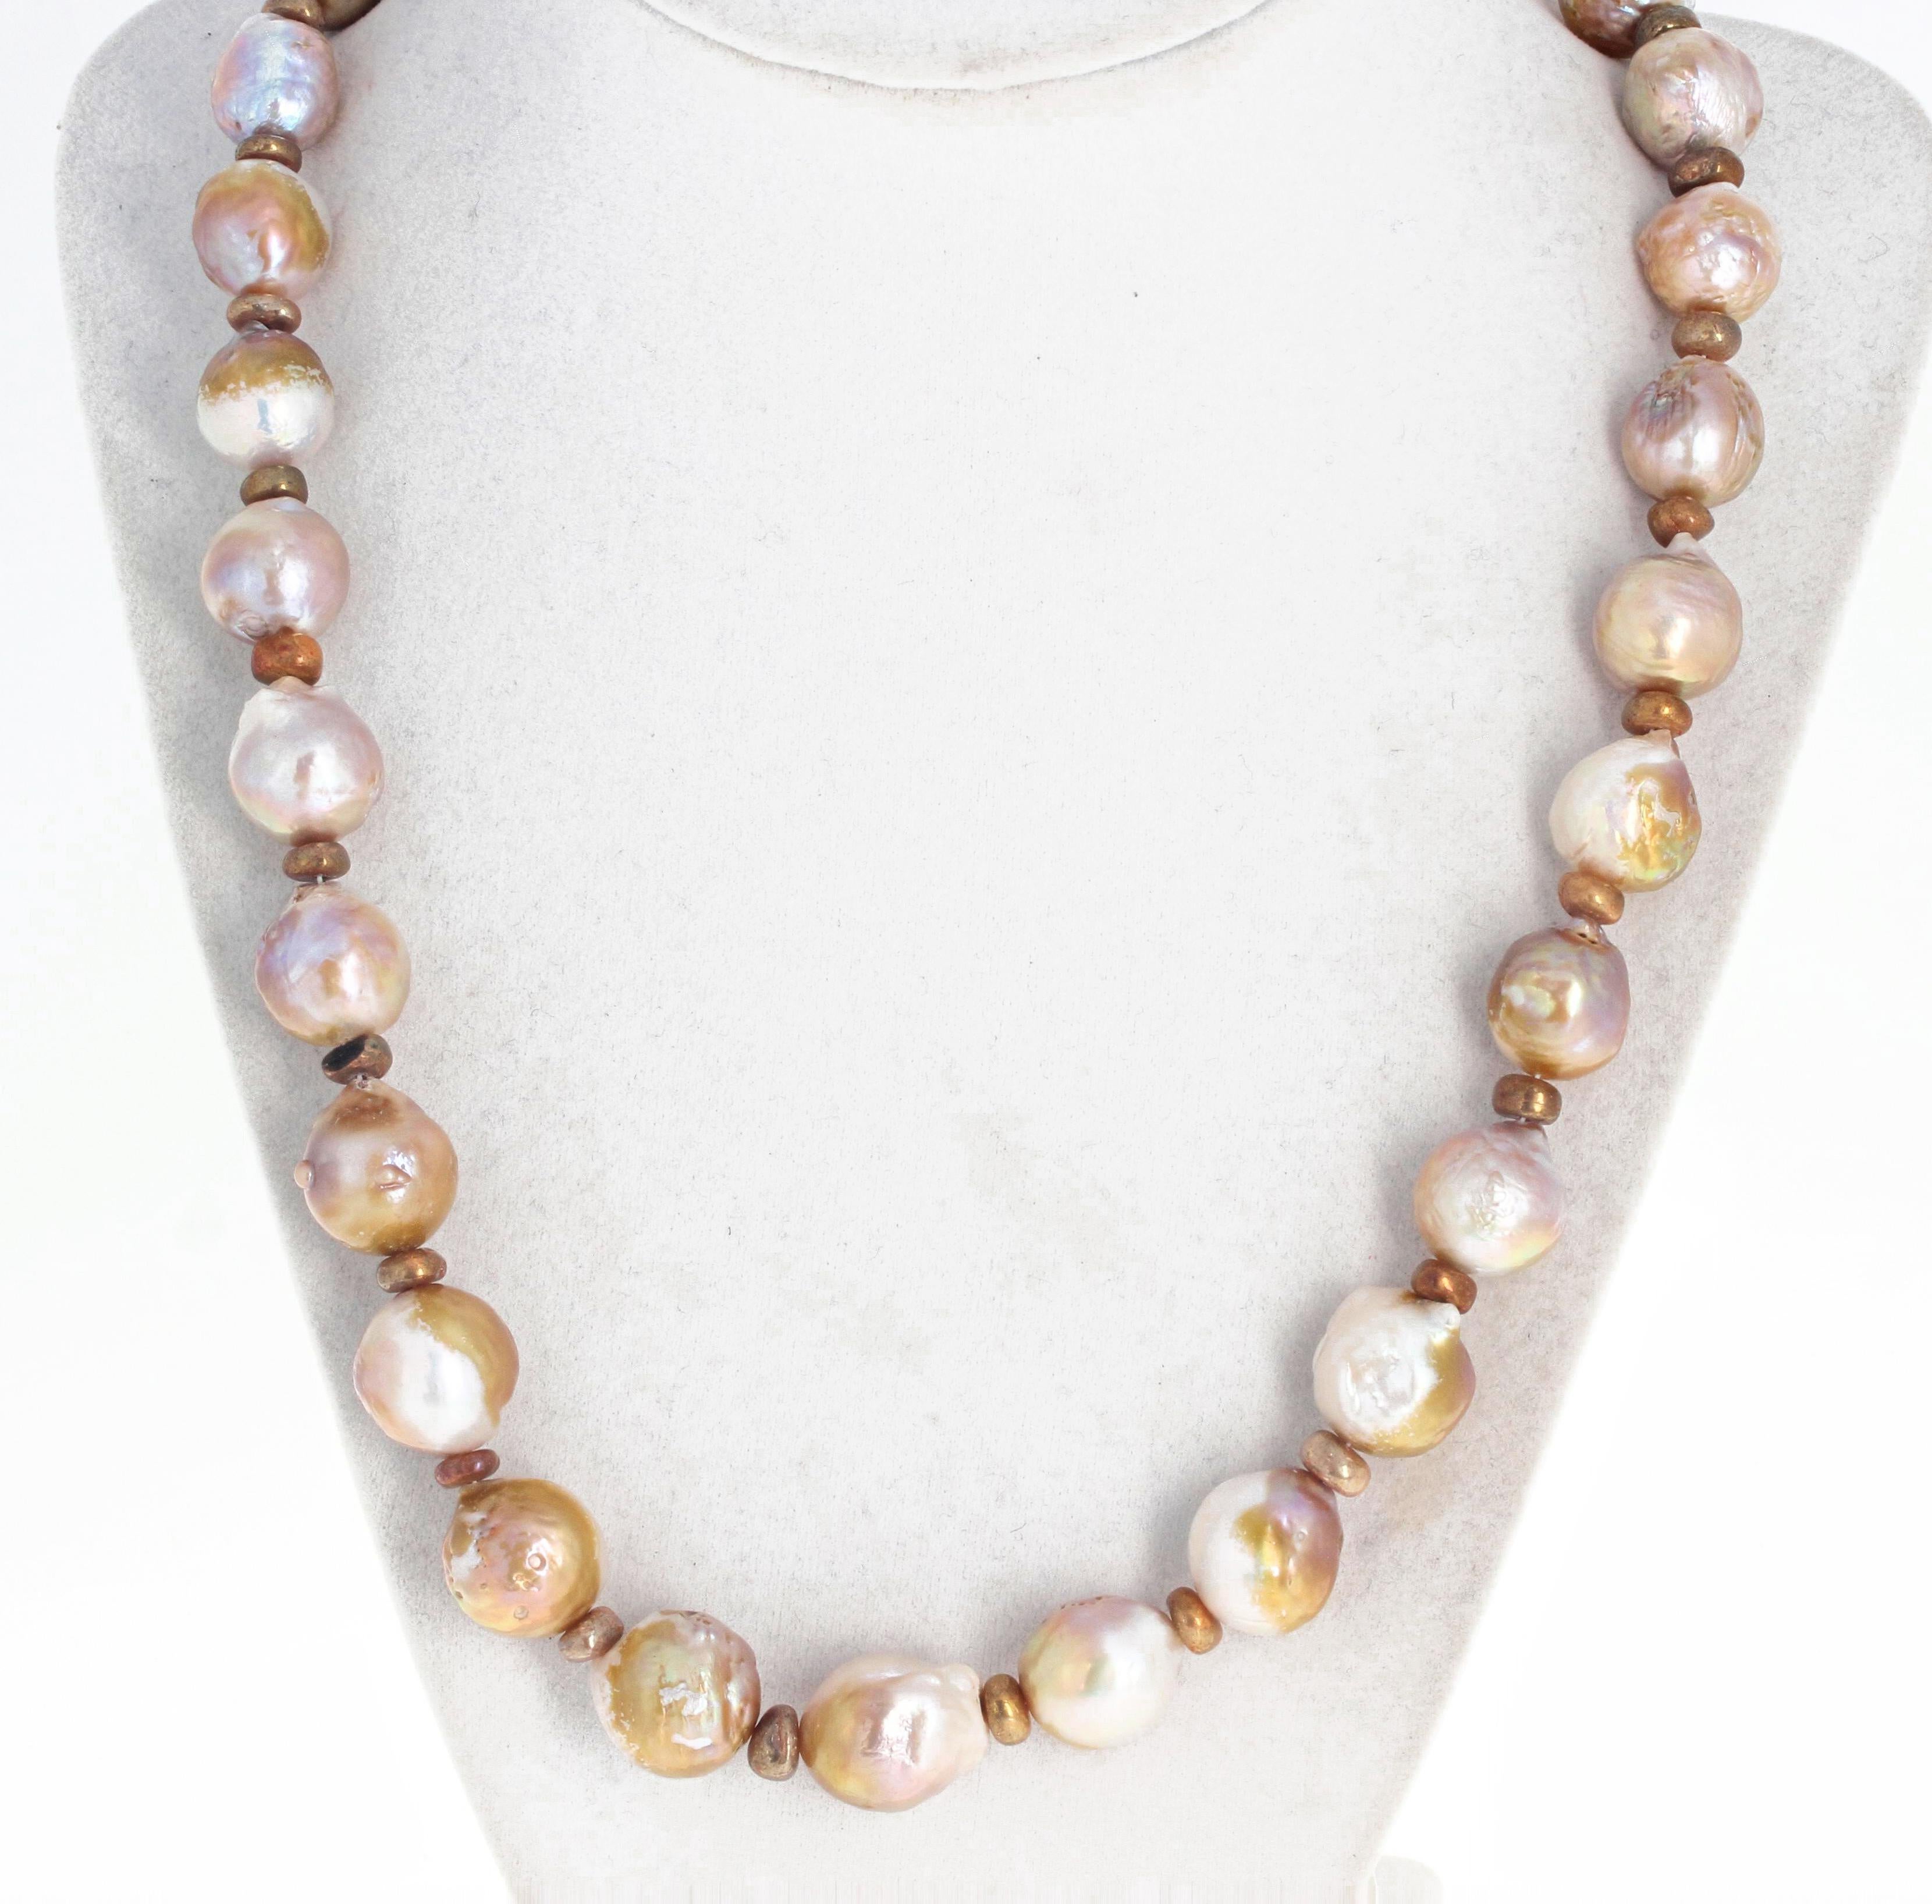 AJD Dramatic Real Goldy Glowing Cultured Ocean Pearl Collier Neuf - En vente à Raleigh, NC